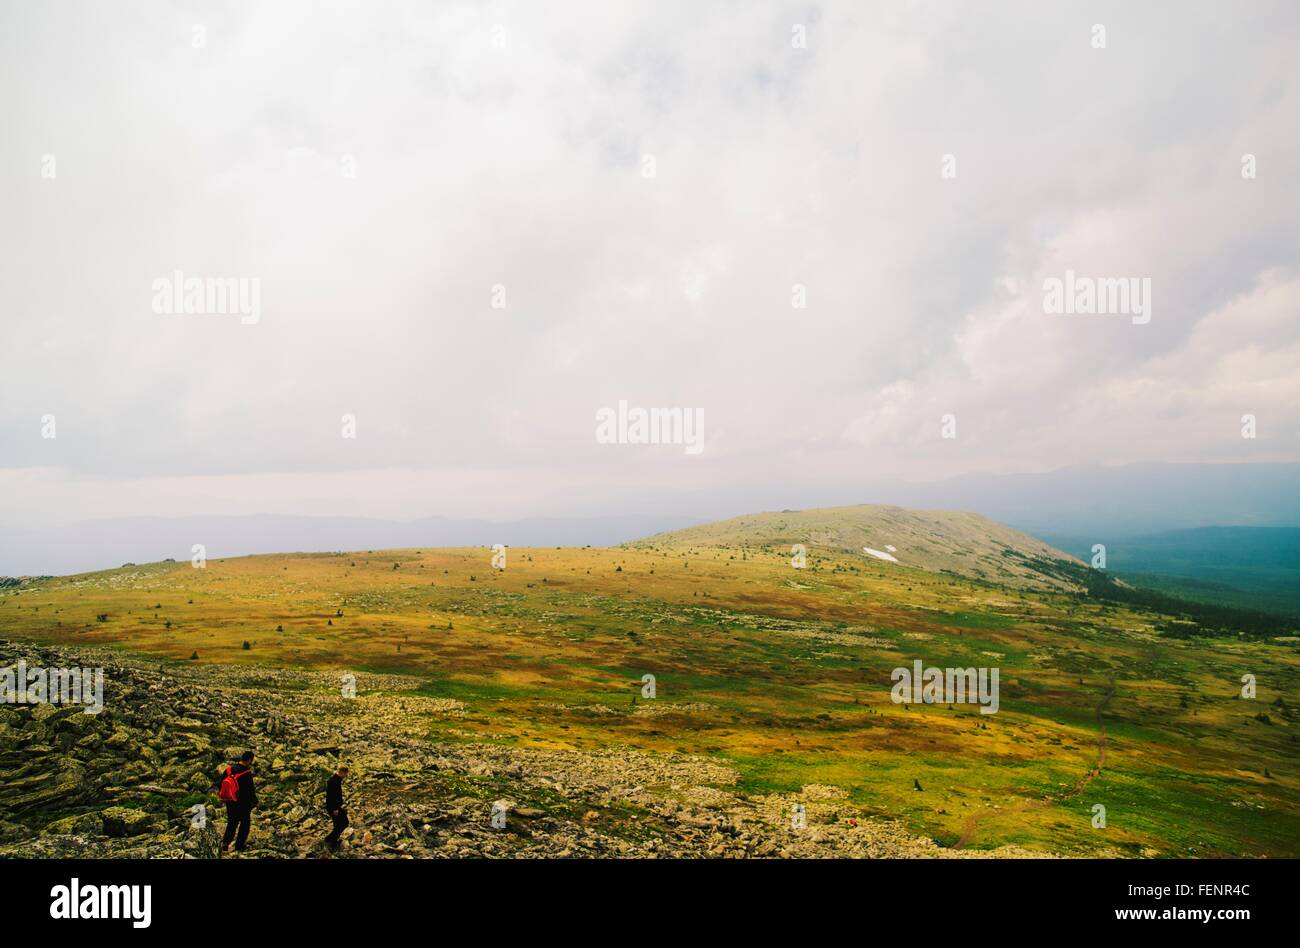 Two men hiking in Ural Mountains, Russia Stock Photo